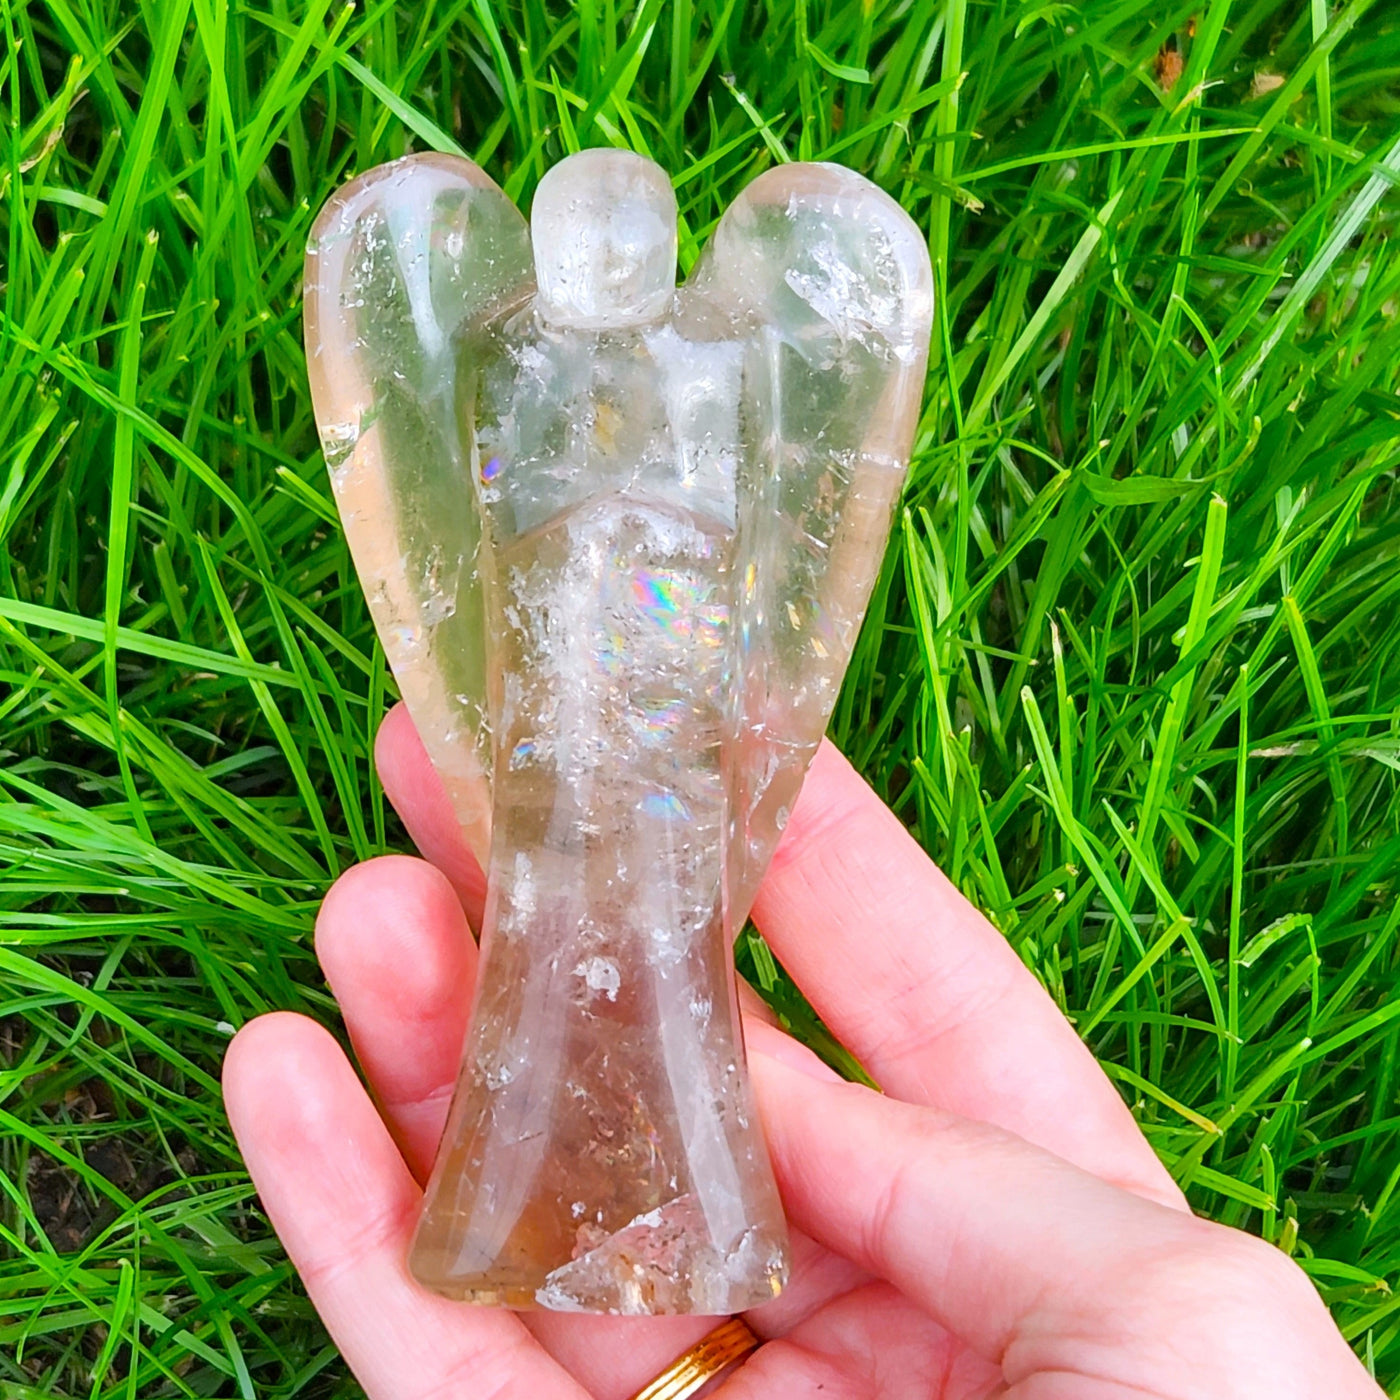 genuine Smoky Quartz angel carving shape by Energy Muse shown outside in natural light displaying the natural prismatic rainbows within